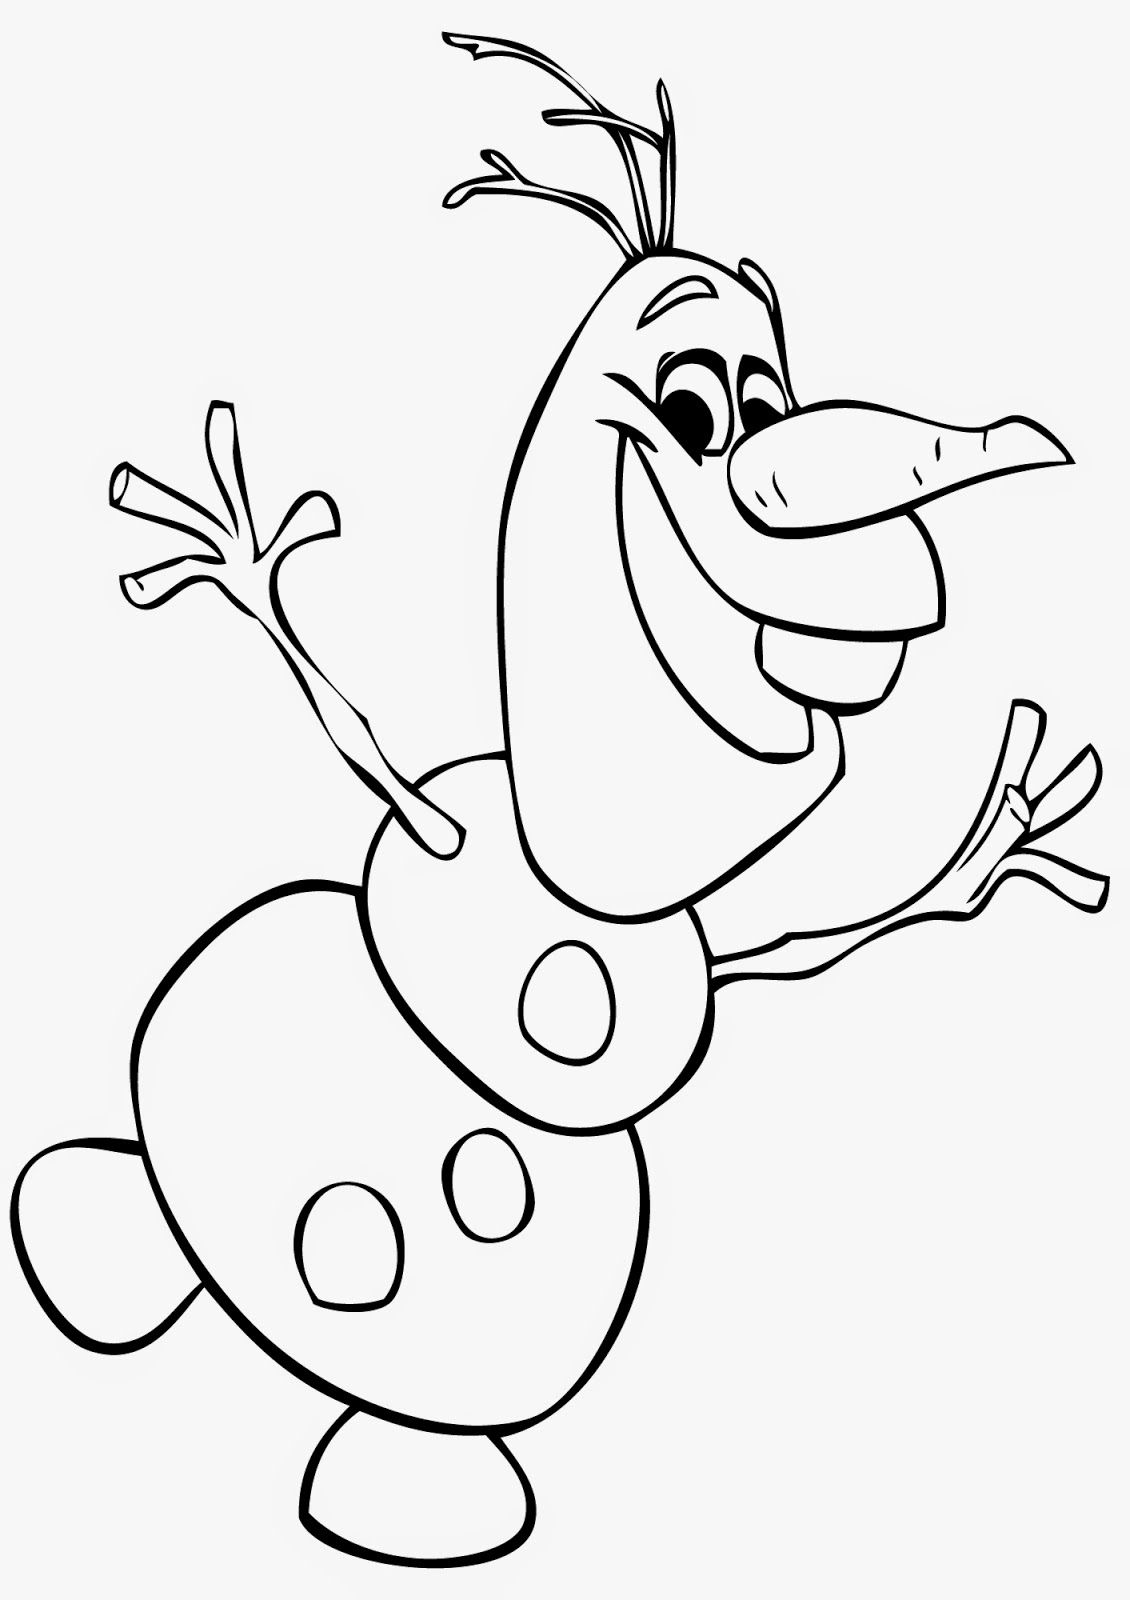 Download Olaf Coloring Pages - Coloring Home